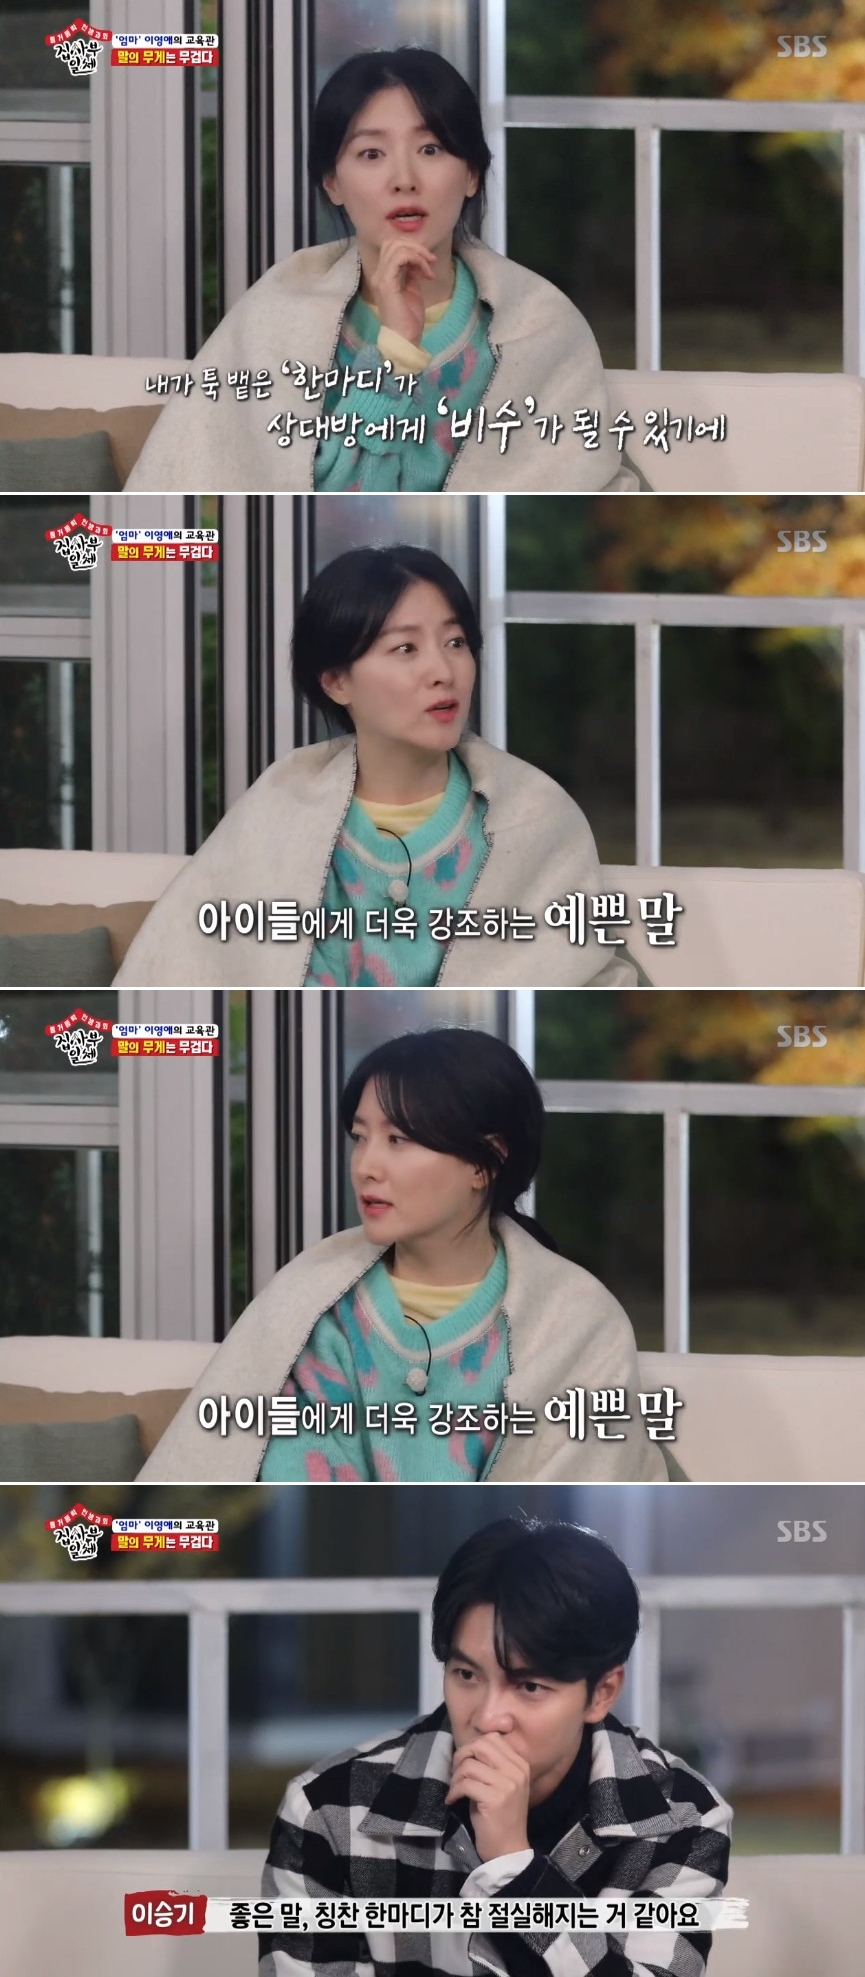 Seoul) = Lee Yeong-ae has revealed his human charm following the last broadcast.On SBS All The Butlers broadcasted on the afternoon of the afternoon, I looked into the ordinary life as the mother of actor Lee Yeong-ae.Lee Sang-yun, Lee Seung-gi and Yang Se-hyeong and Yook Sungjae spent time with their children to find his house and win.In the form of a normal mother, Lee Yeong-ae, not a top star, he has sincerely told the members about their worries and values ​​for children.Lee Yeong-ae said, I go to school in the morning and follow a lot of childrens schedules. I get married late and know more about the importance of my family.Im trying to stay with my children as much as possible, she said, revealing her fondness for Family.In particular, Lee Yeong-ae said, There was no fear of marriage. There was a worry about the fans disappearing in their 20s and 30s.The more I thought, Lets make roots that do not shake even if I come back. I thought about it and ran hard in my 20s and 30s. Lee Yeong-ae said, It was nourishing for the works that were early, not the works that were popular such as Dae Jang Geum or Kindly Kim Jae-jae.In addition, after debuting with chocolate advertisement, department store said that it sold other chocolate, and it showed a somewhat wrong appearance.Especially, Lee Yeong-aes charm, which is all about the words to be relaxed, gave a smile to viewers.On the day of the show, I also had time to think about the importance of words related to the news of a series of entertainment accidents caused by the recent bad news.SNS writing is also impressed and sometimes empowered, said Yook Sungjae, who said, There are many cases of opposition.Lee Yeong-ae said, It seems important because friends who make their debut early are very weak to judge themselves, so they are wielded by horses, worry about themselves, and see that there are many bad things, so they can save and kill people.Lee Seung-gi said, It seems like these days when a good word, a word of praise is really desperate.